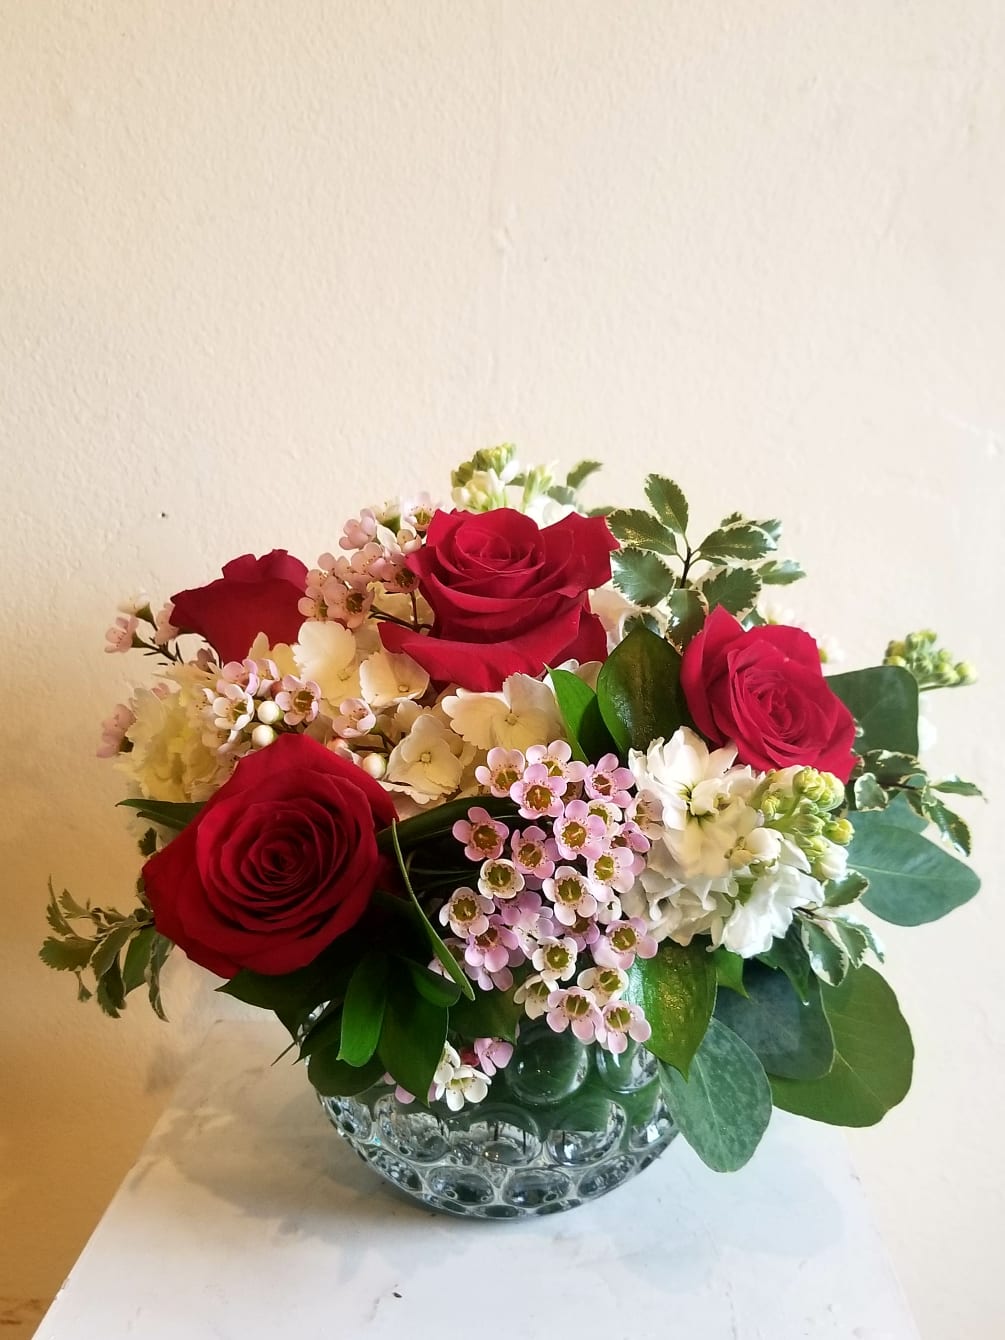 Roses, hydrangea, and accent flowers.
